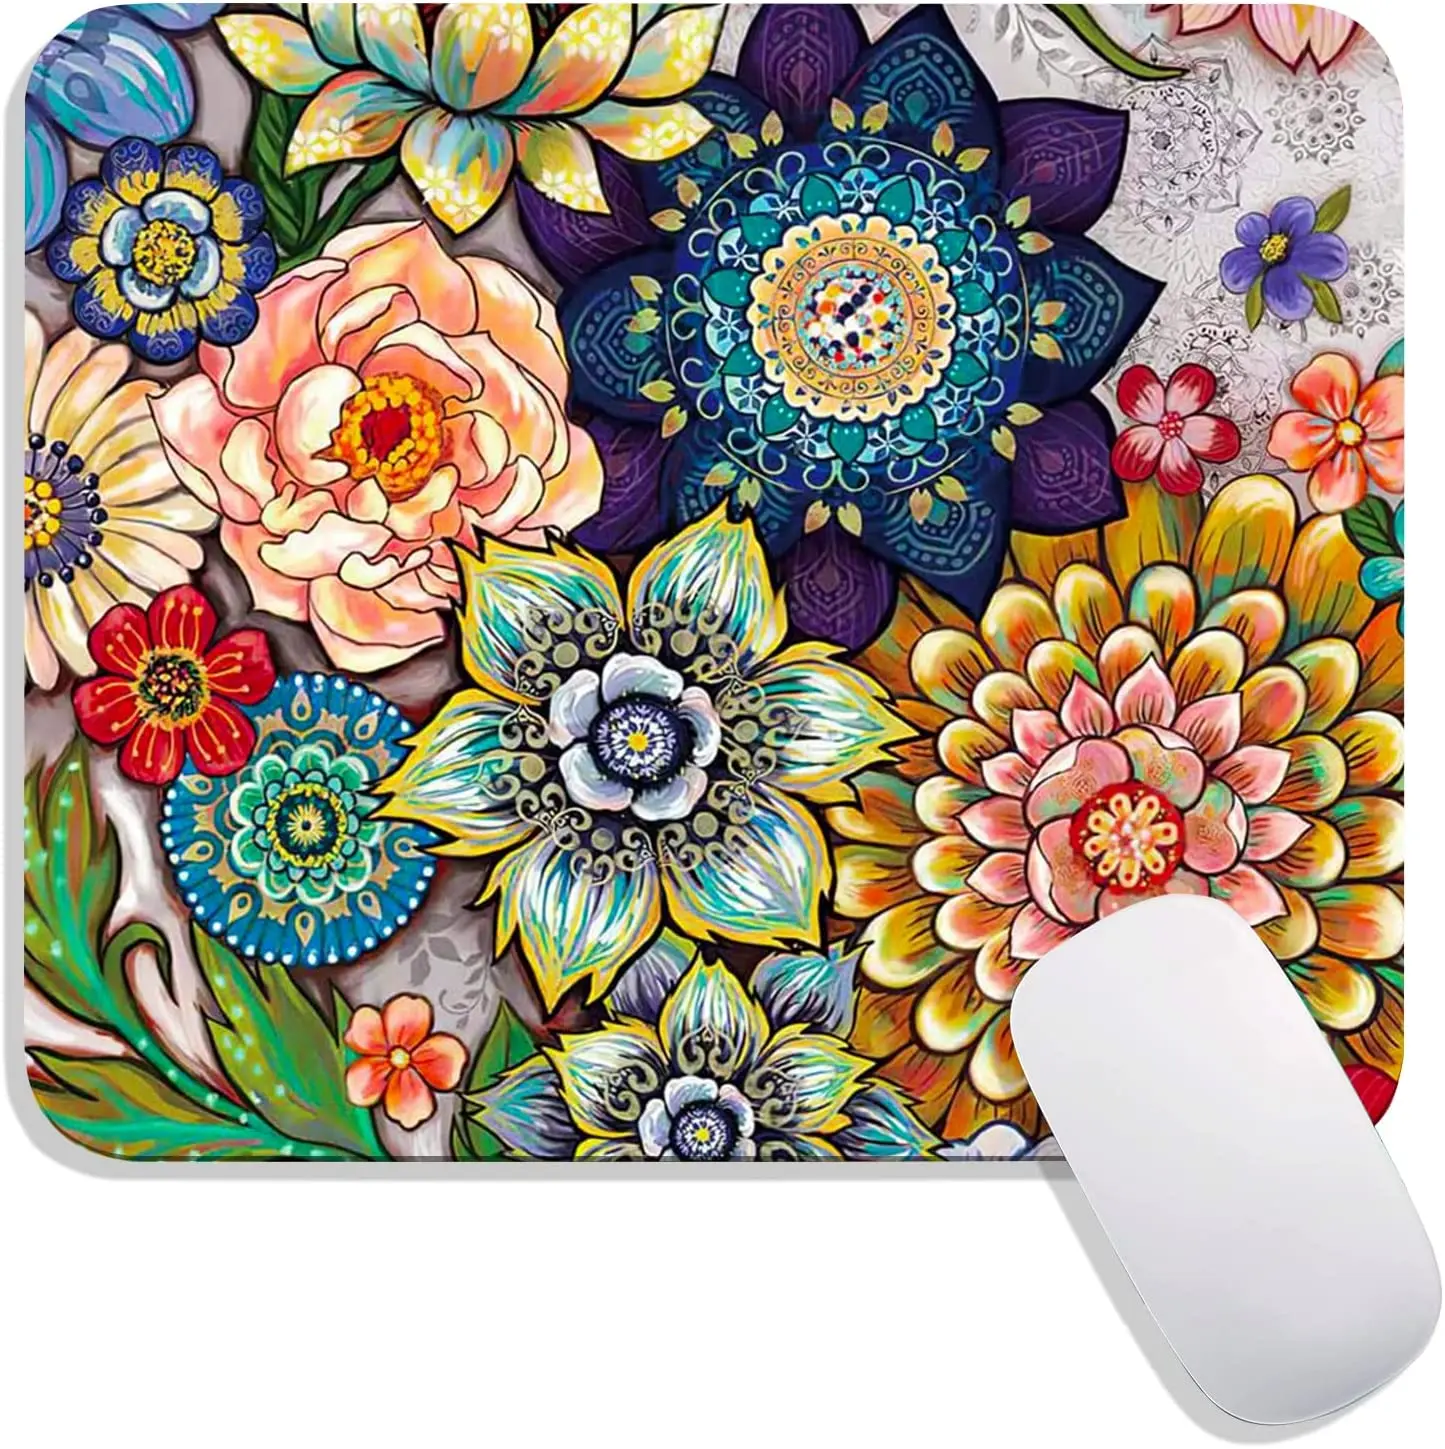 Pretty Flower Mouse Pad Personalized Premium-Textured Mousepads Design Non-Slip Rubber Base Computer Mouse Pads 9.7x7.9 In